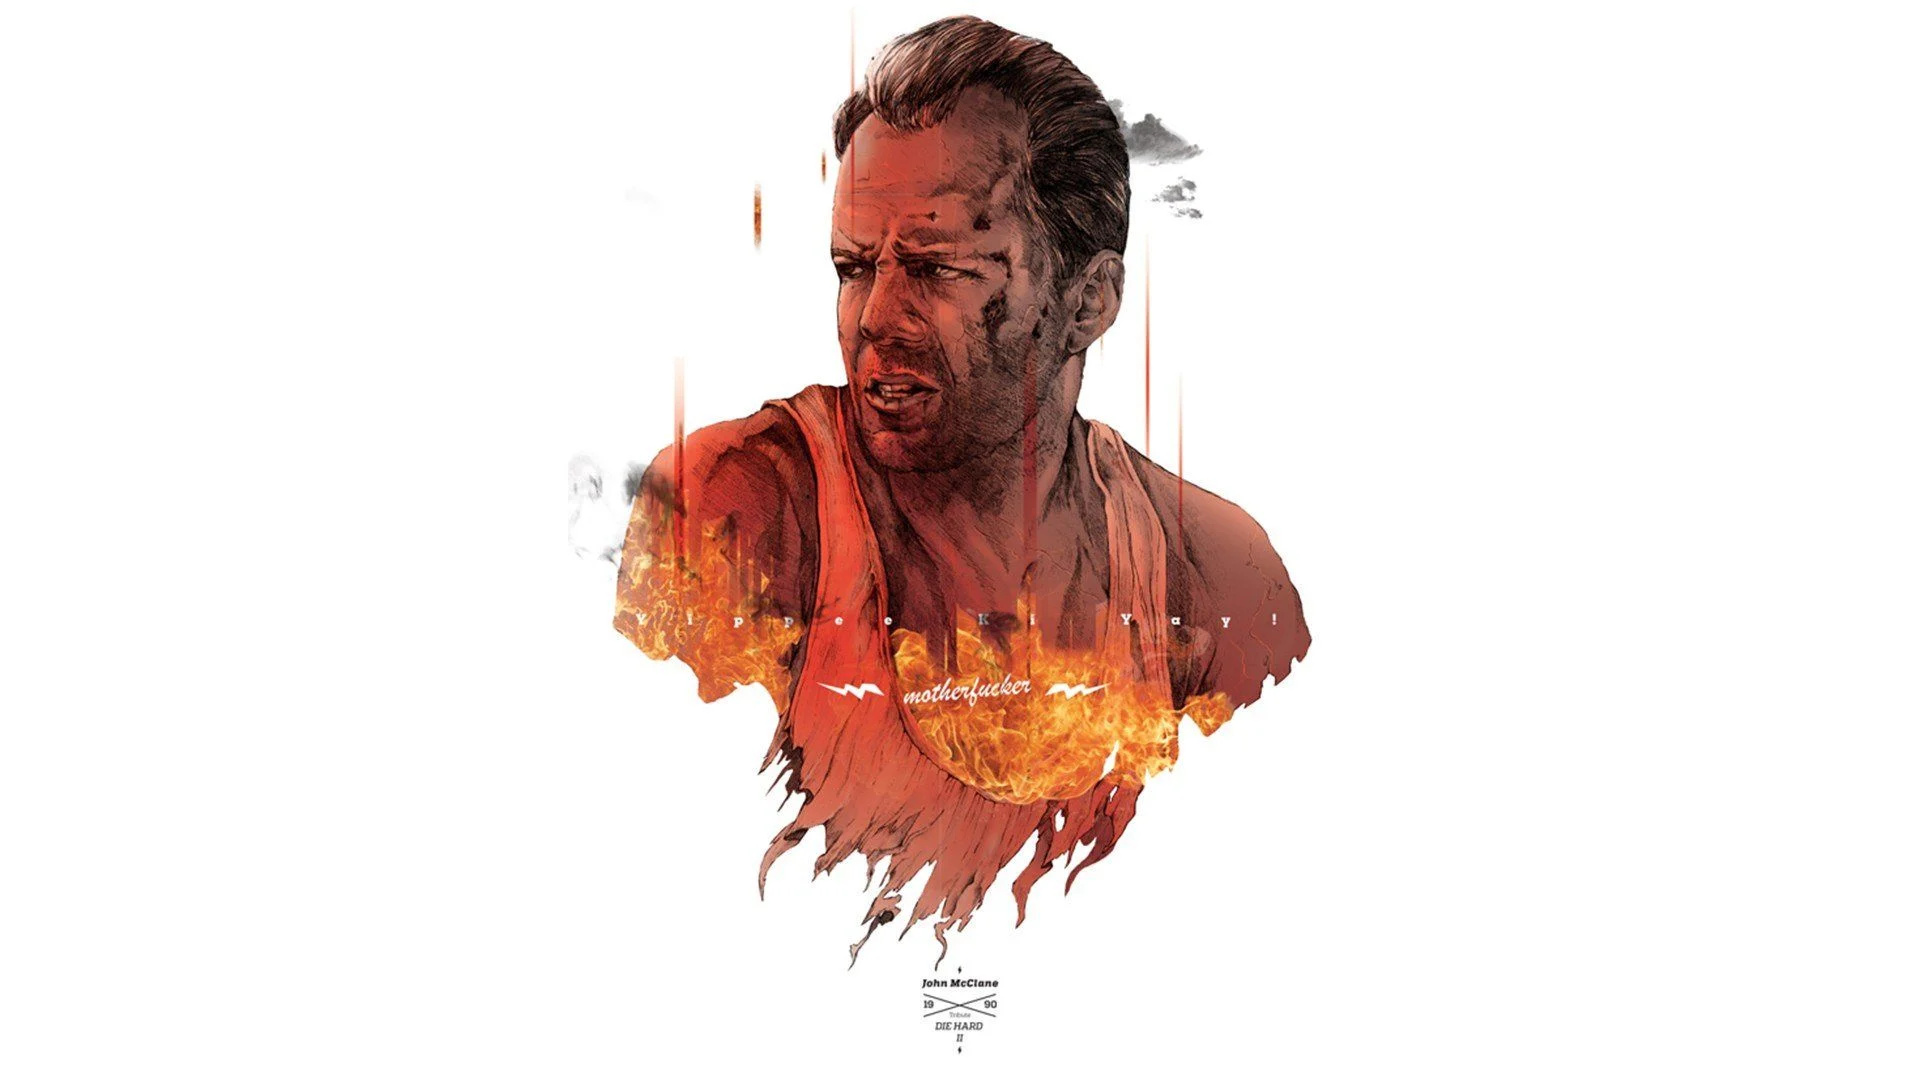 Die Hard: With a Vengeance, Iconic wallpapers, Intense scenes, Adrenaline-fueled, 1920x1080 Full HD Desktop